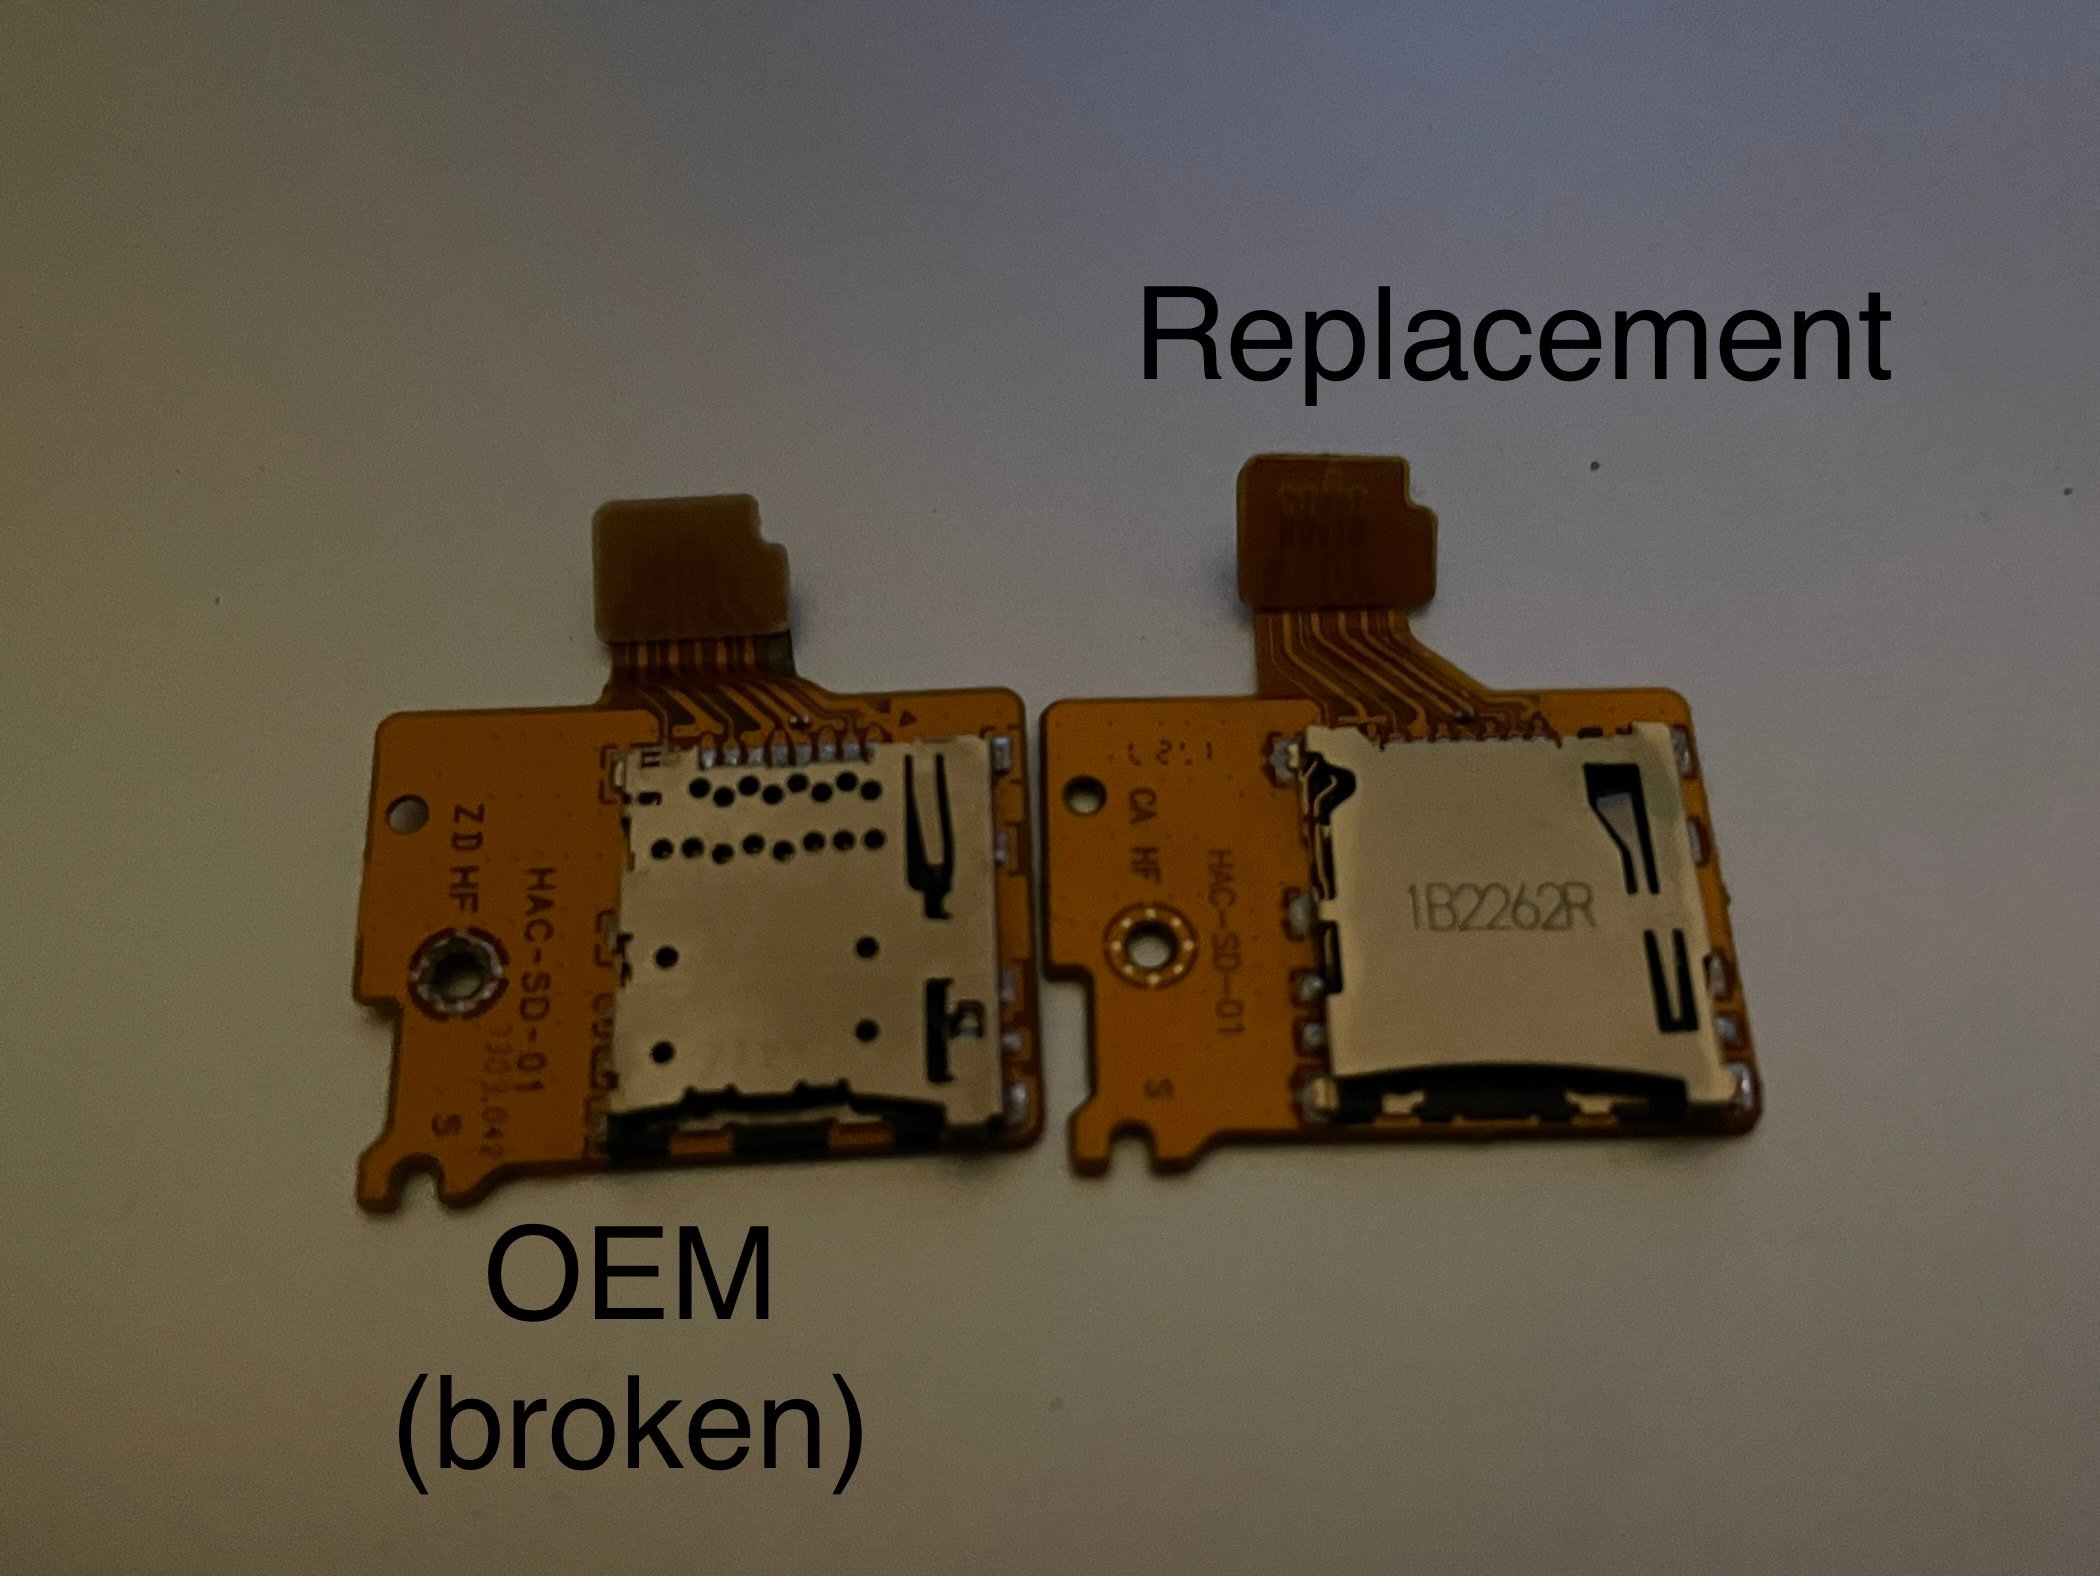 Replacement SD Card slot not functional? | GBAtemp.net - The Independent  Video Game Community